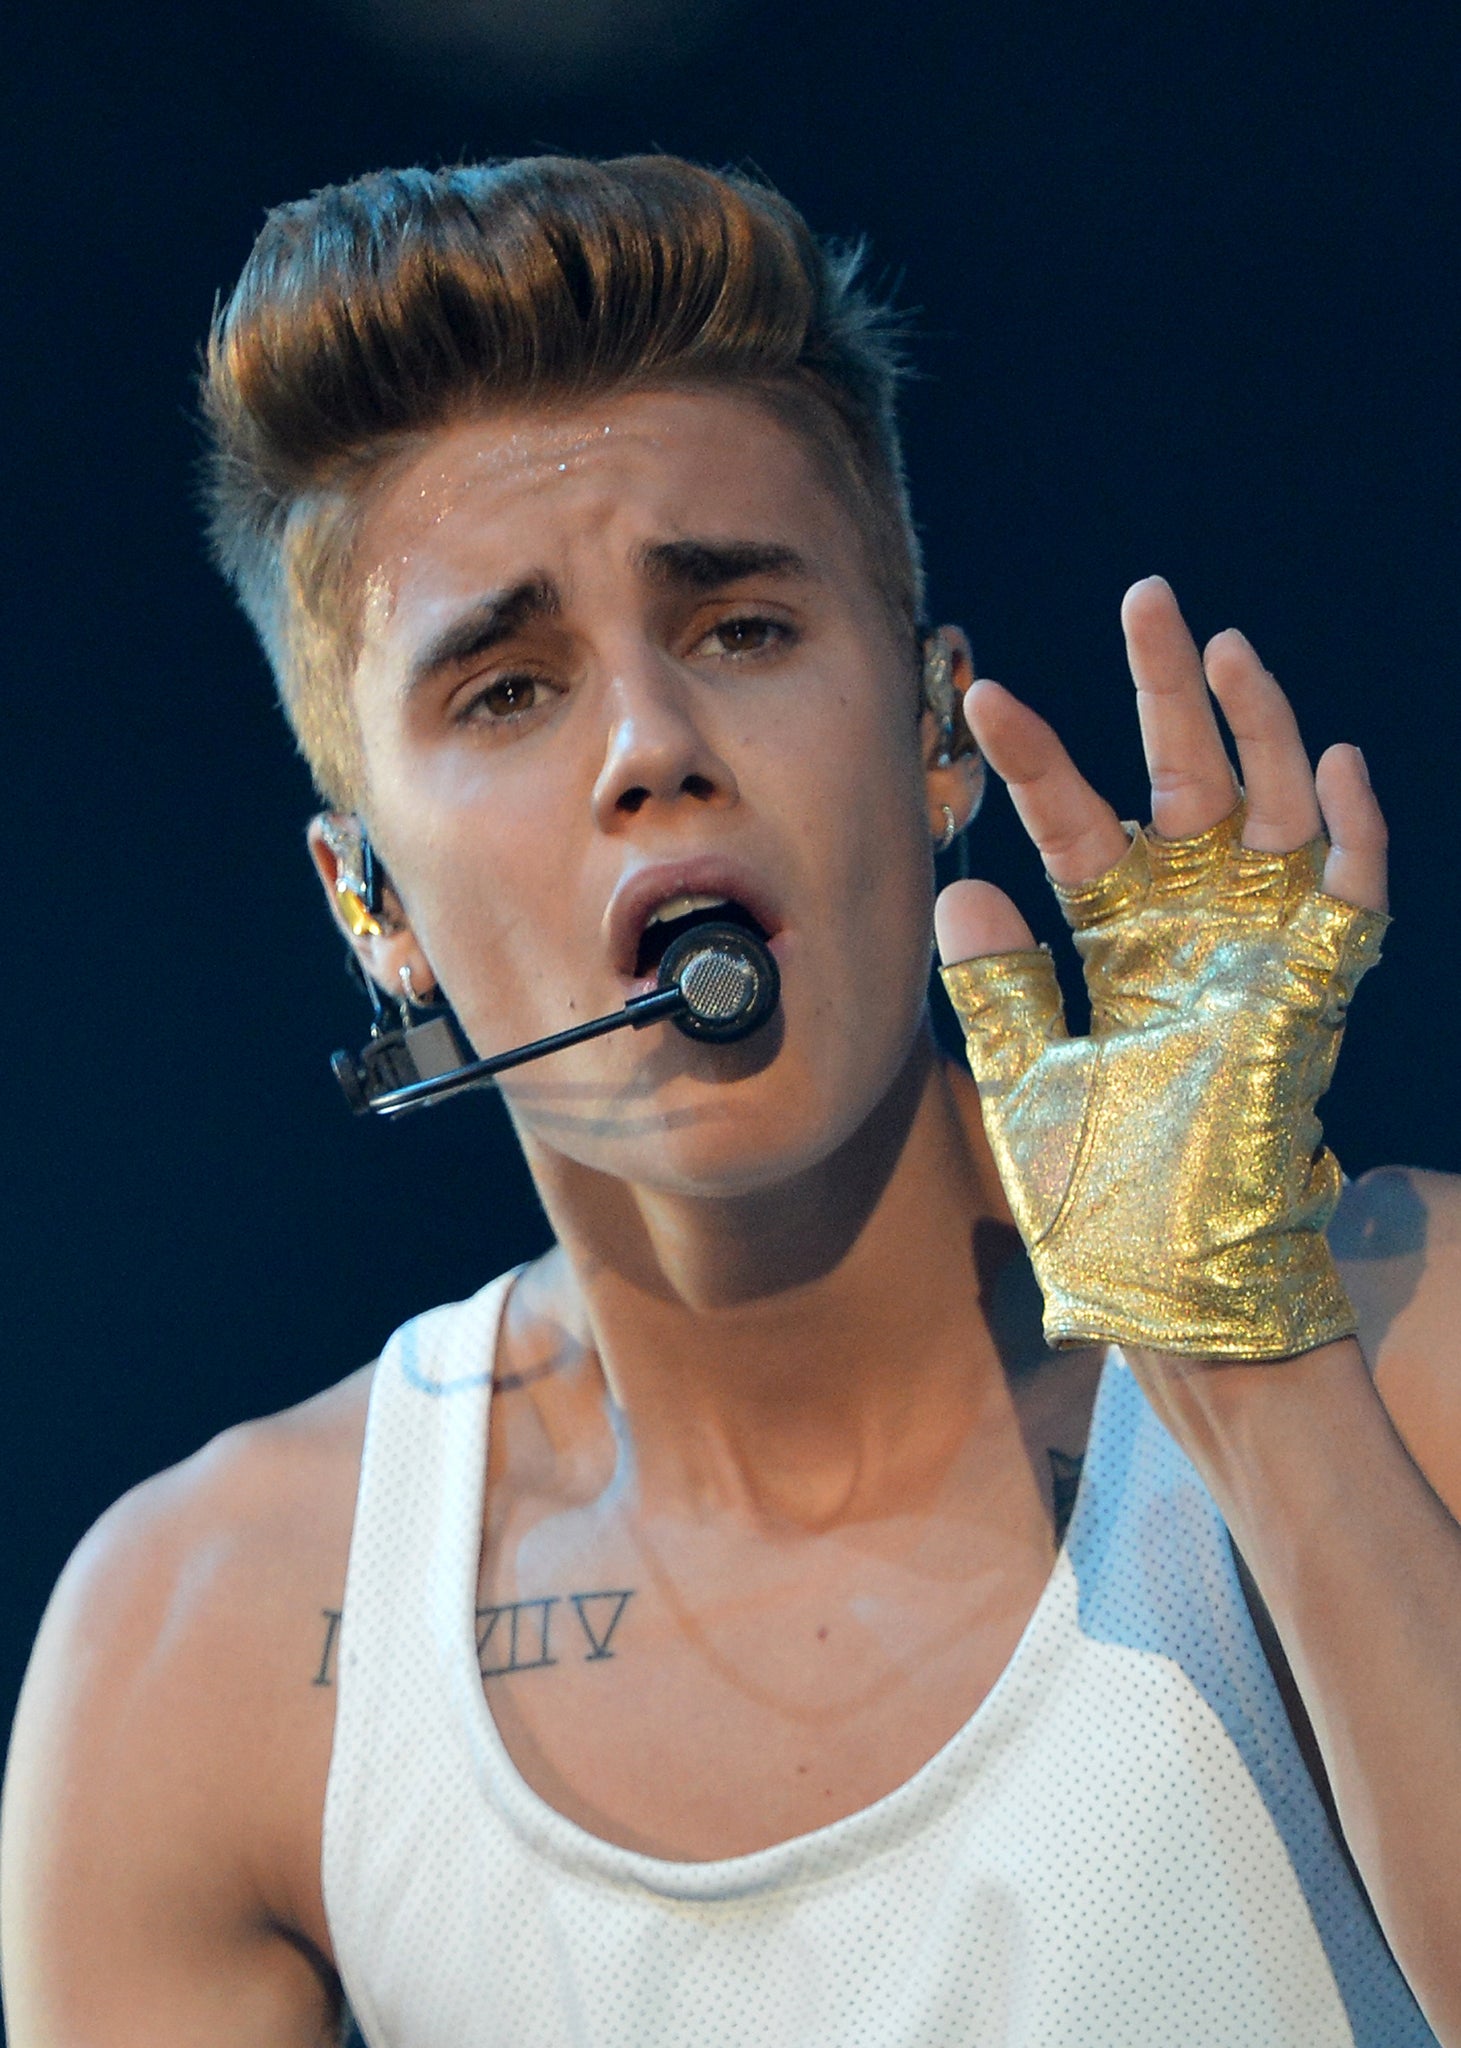 Justin Bieber has been accused of threatening his neighbour